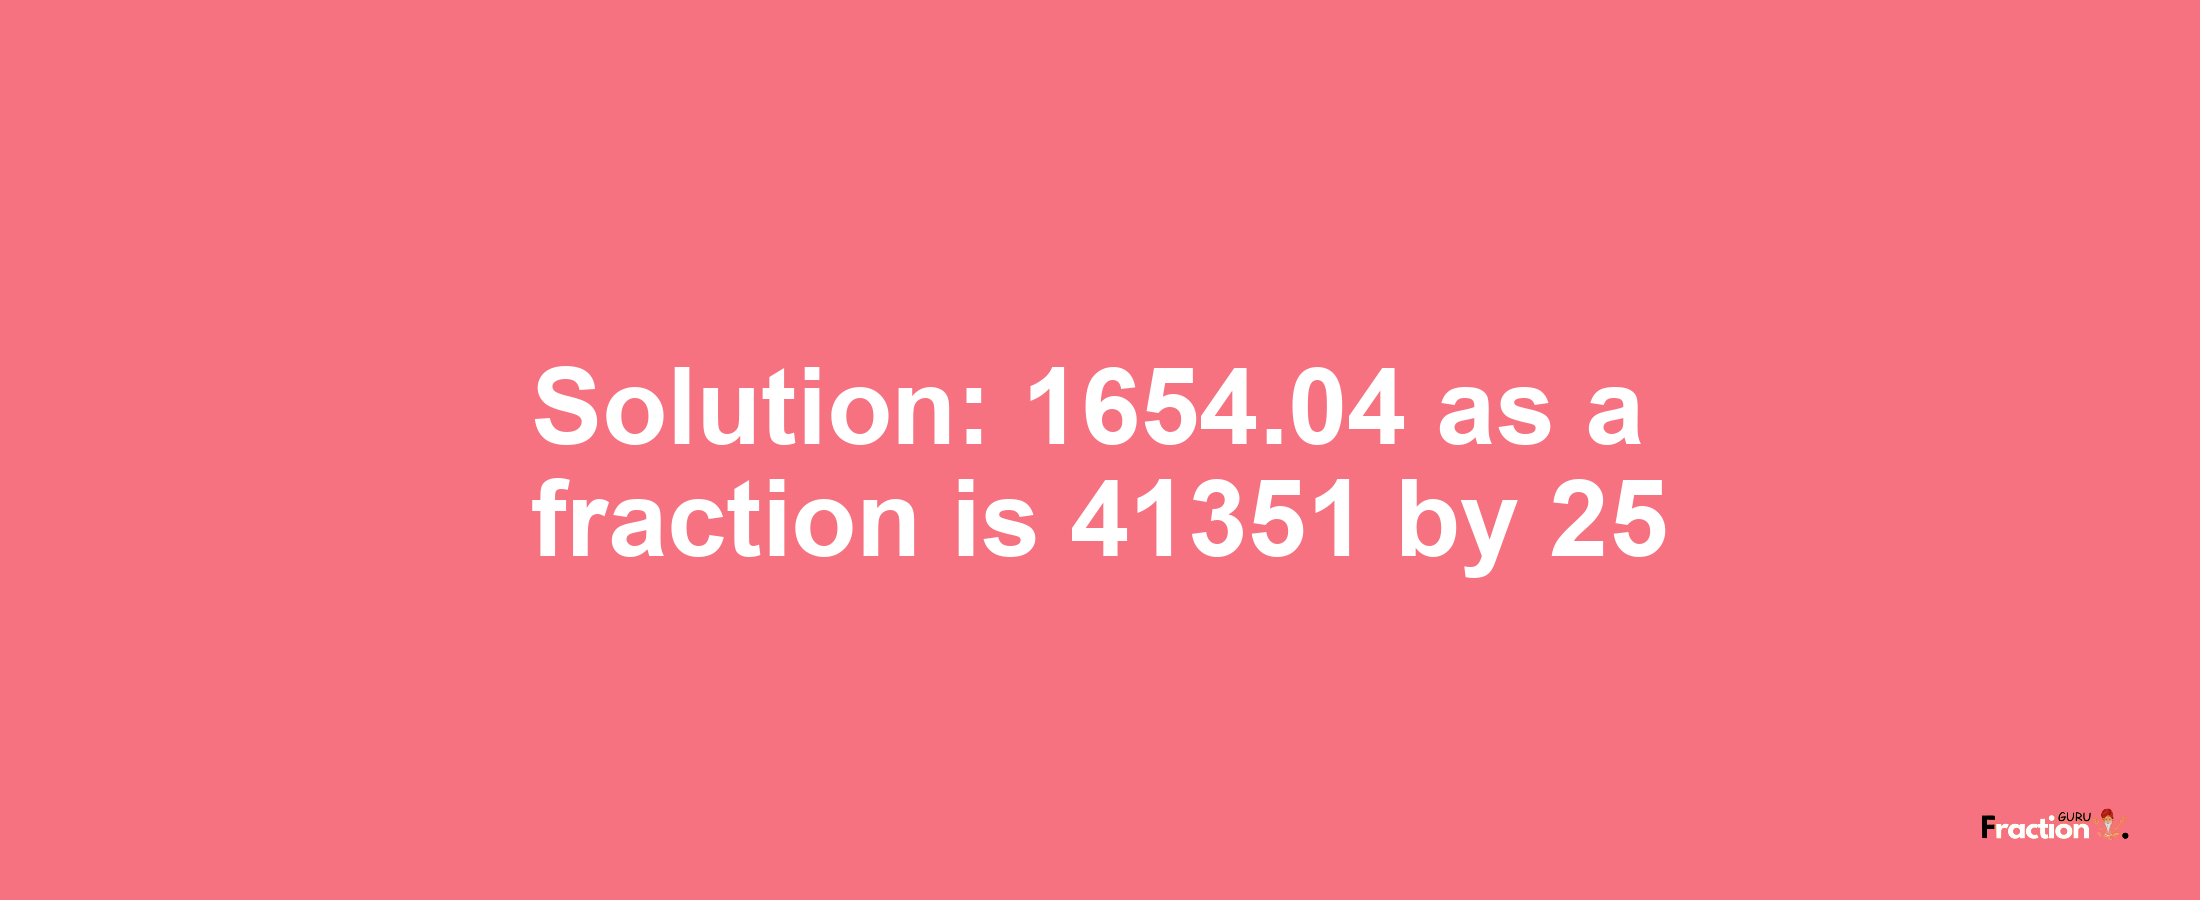 Solution:1654.04 as a fraction is 41351/25